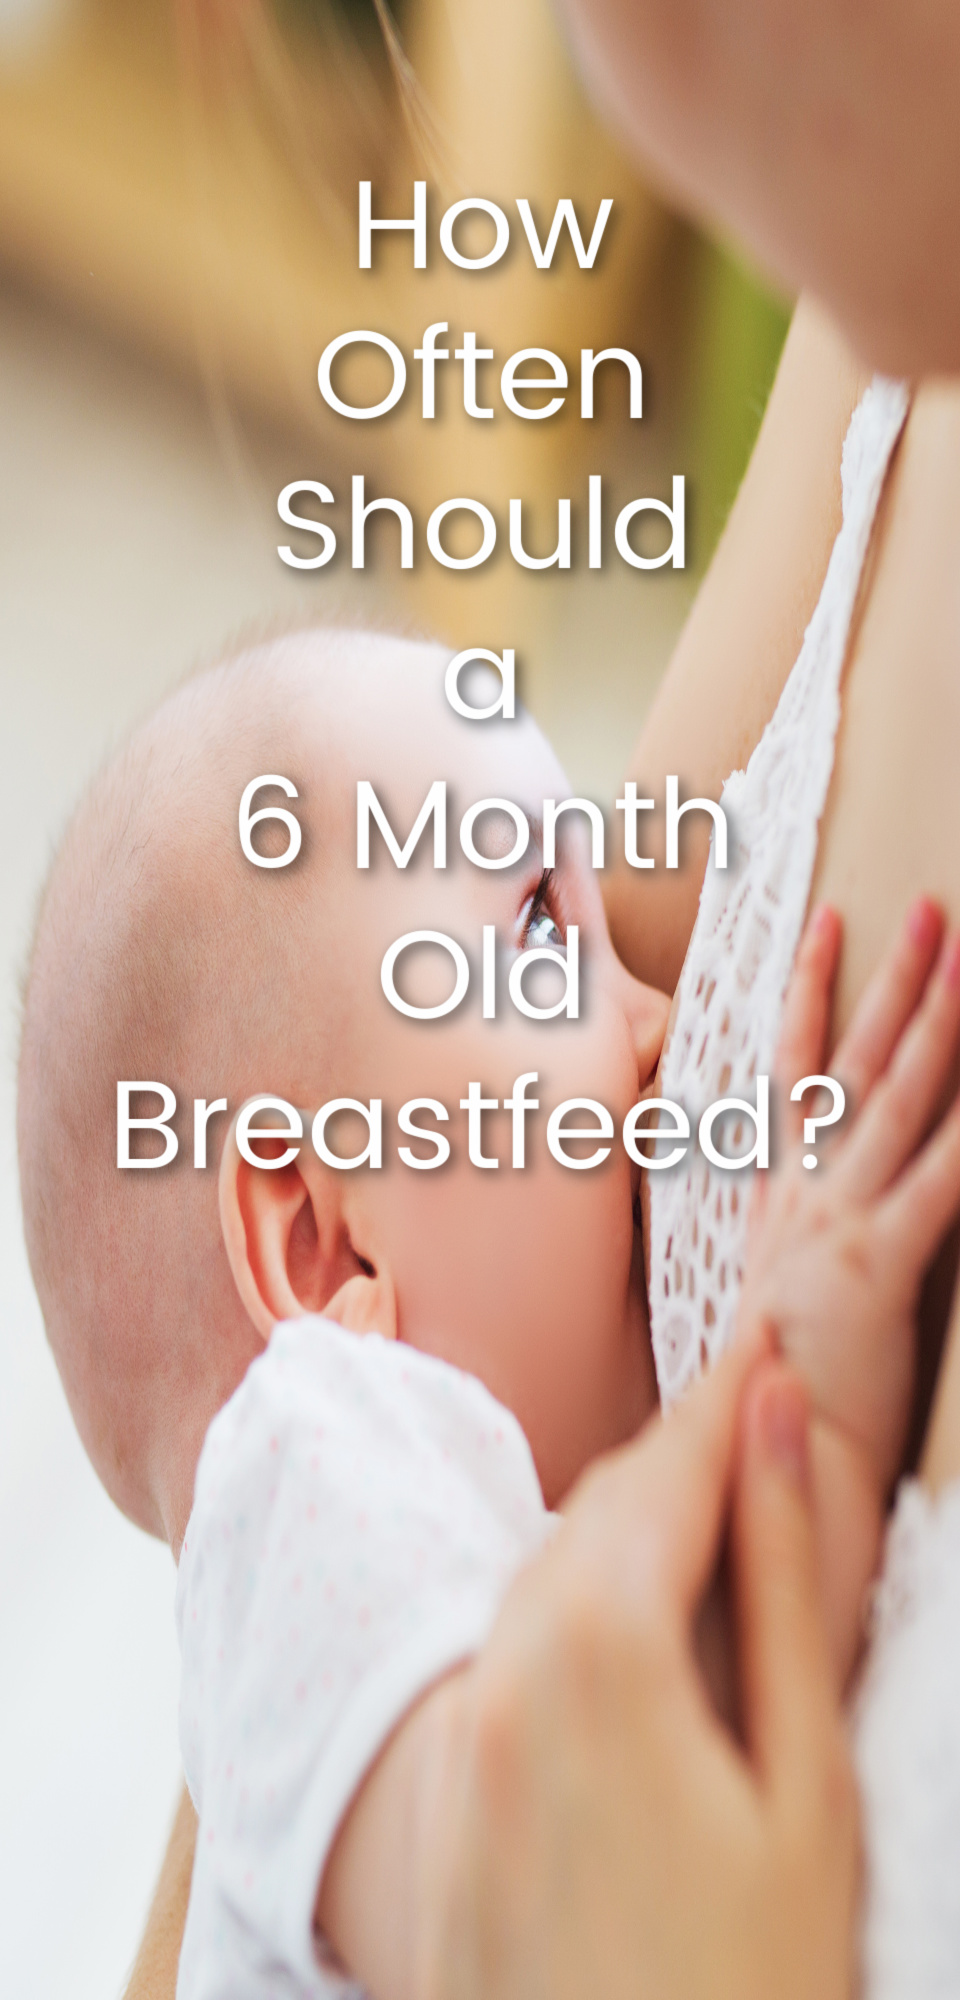 How Often Should a 6-Month-Old Breastfeed? What You Should Know.